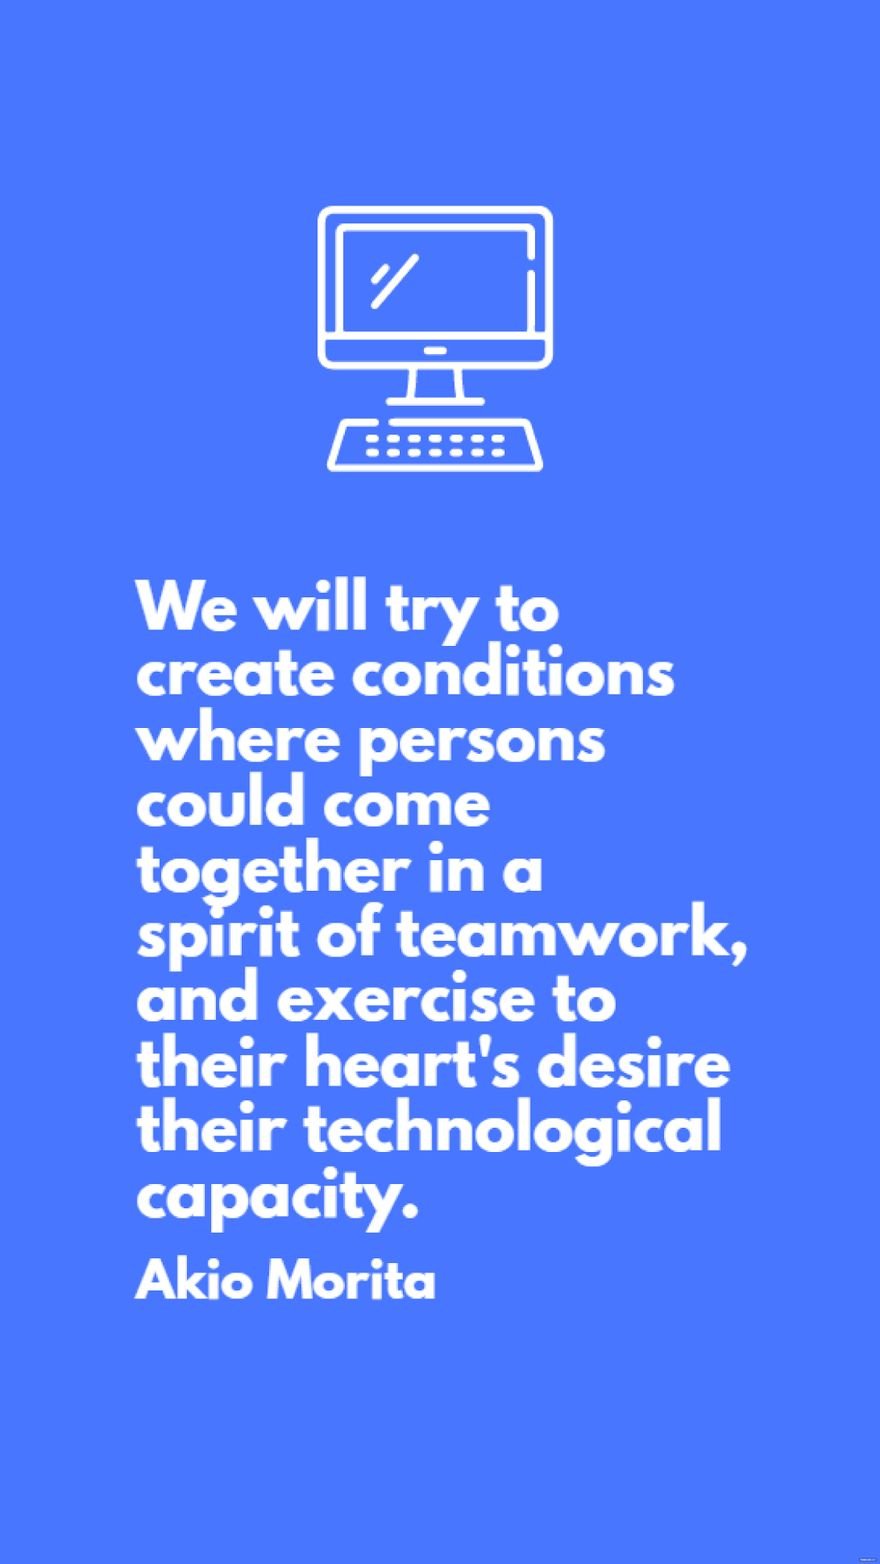 Akio Morita - We will try to create conditions where persons could come together in a spirit of teamwork, and exercise to their heart's desire their technological capacity.